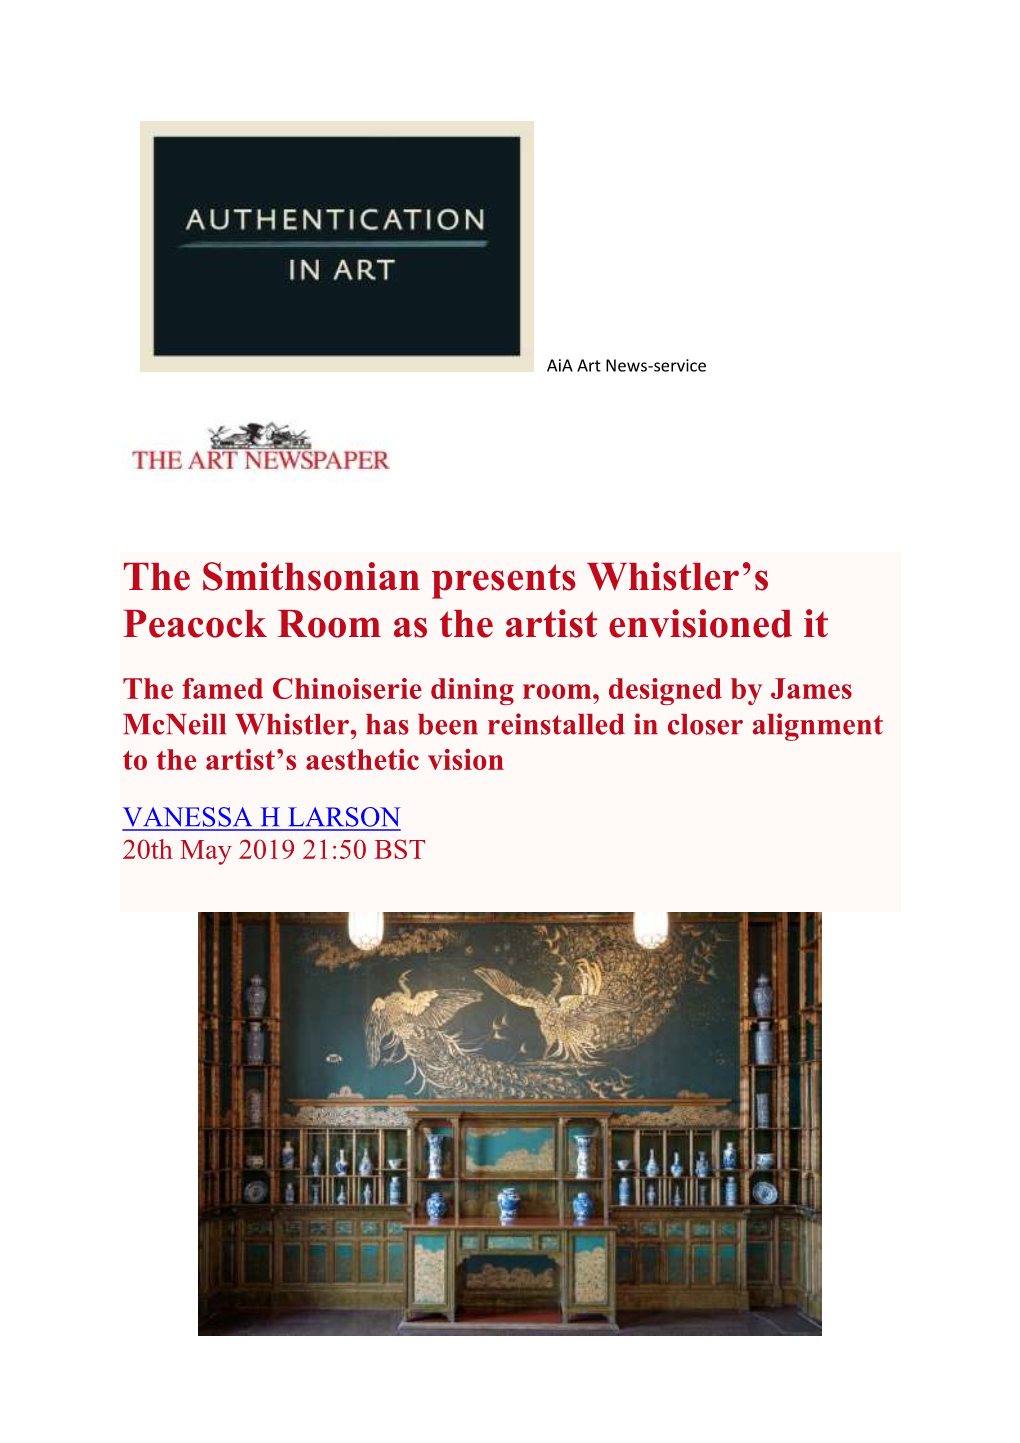 The Smithsonian Presents Whistler's Peacock Room As the Artist